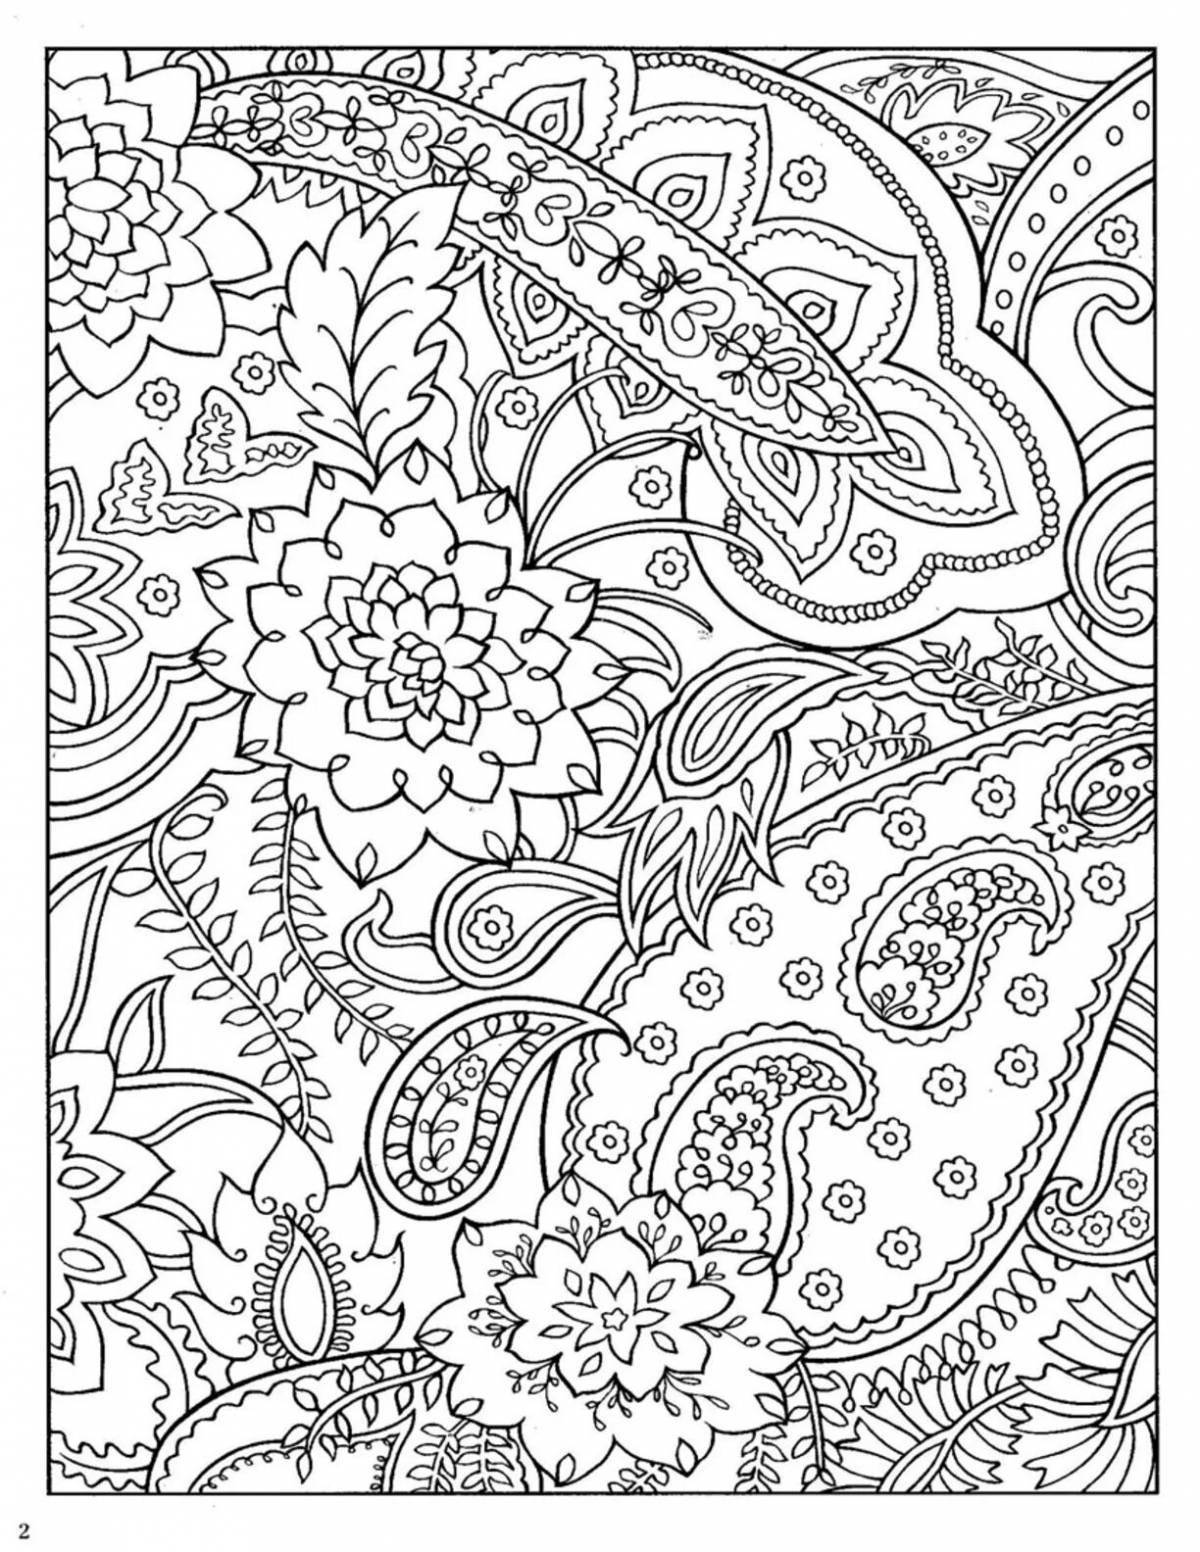 Silent coloring templates